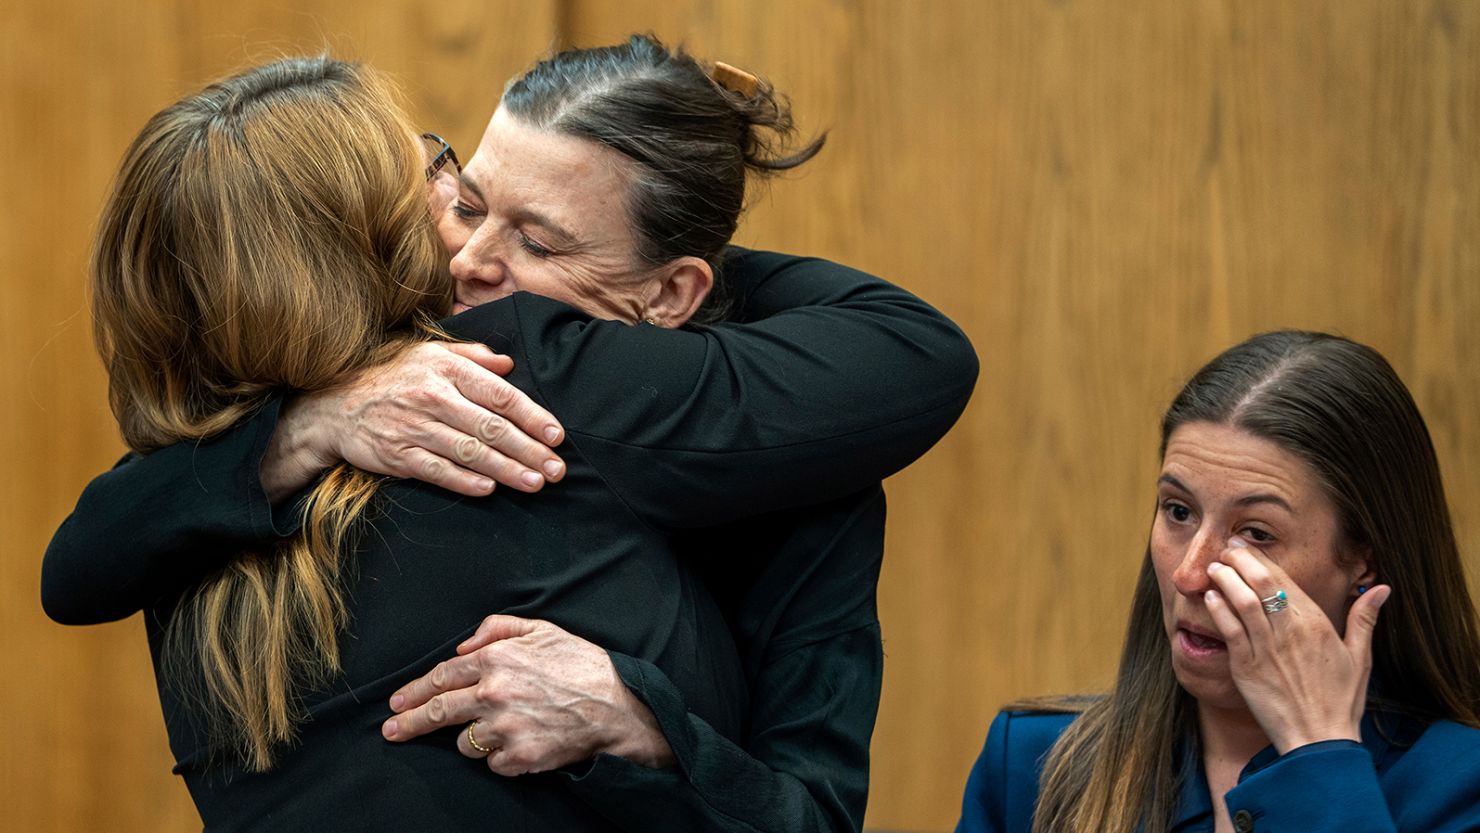 Dr. Giovannina Anthony, second from left, a plaintiff in a lawsuit challenging Wyoming's new near-total abortion ban, hugs her attorney after Teton County Judge Melissa Owens temporarily blocked the law on March 22, 2023.